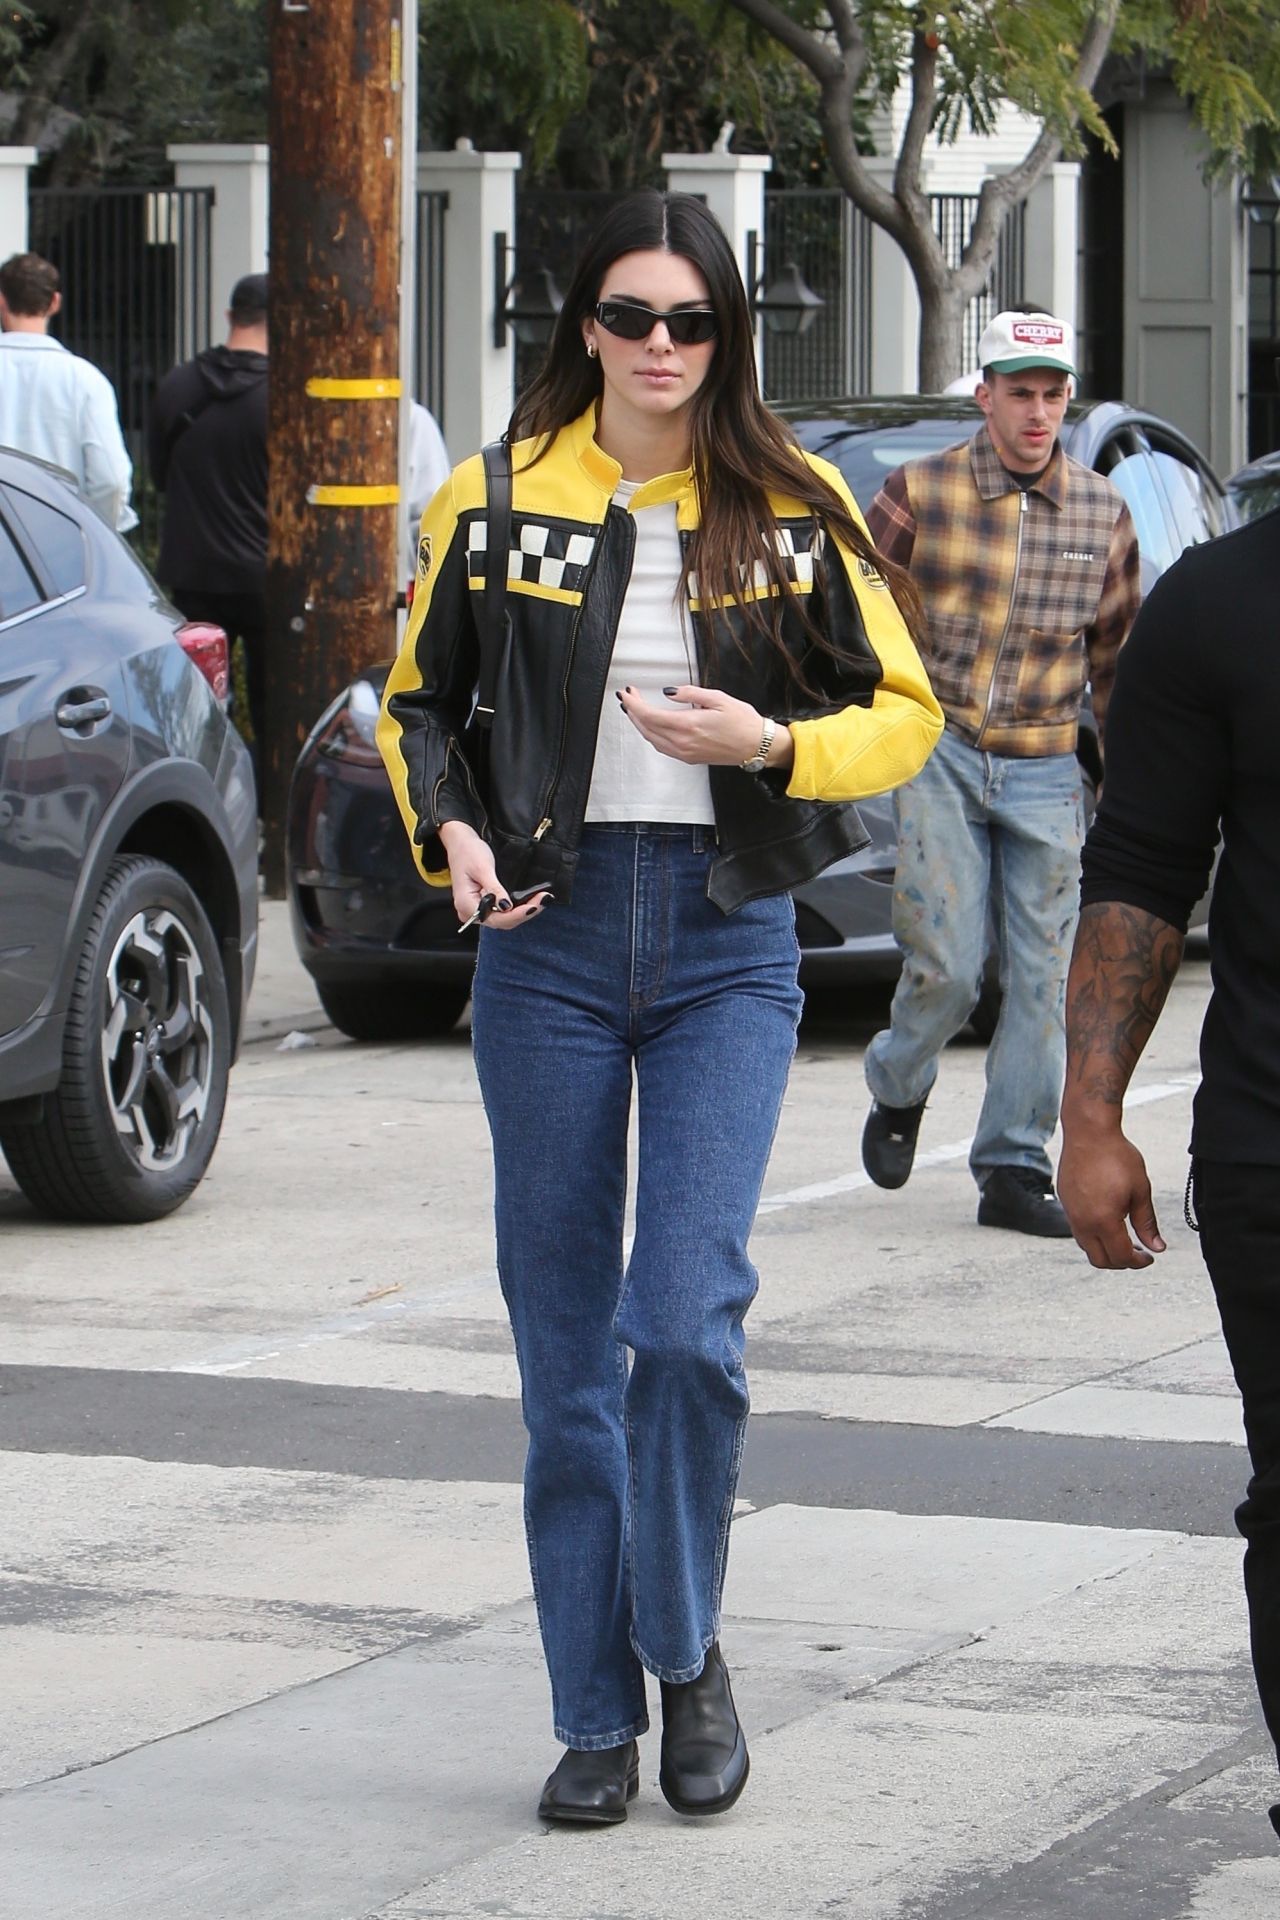 Kendall Jenner West Hollywood January 7, 2023 – Star Style